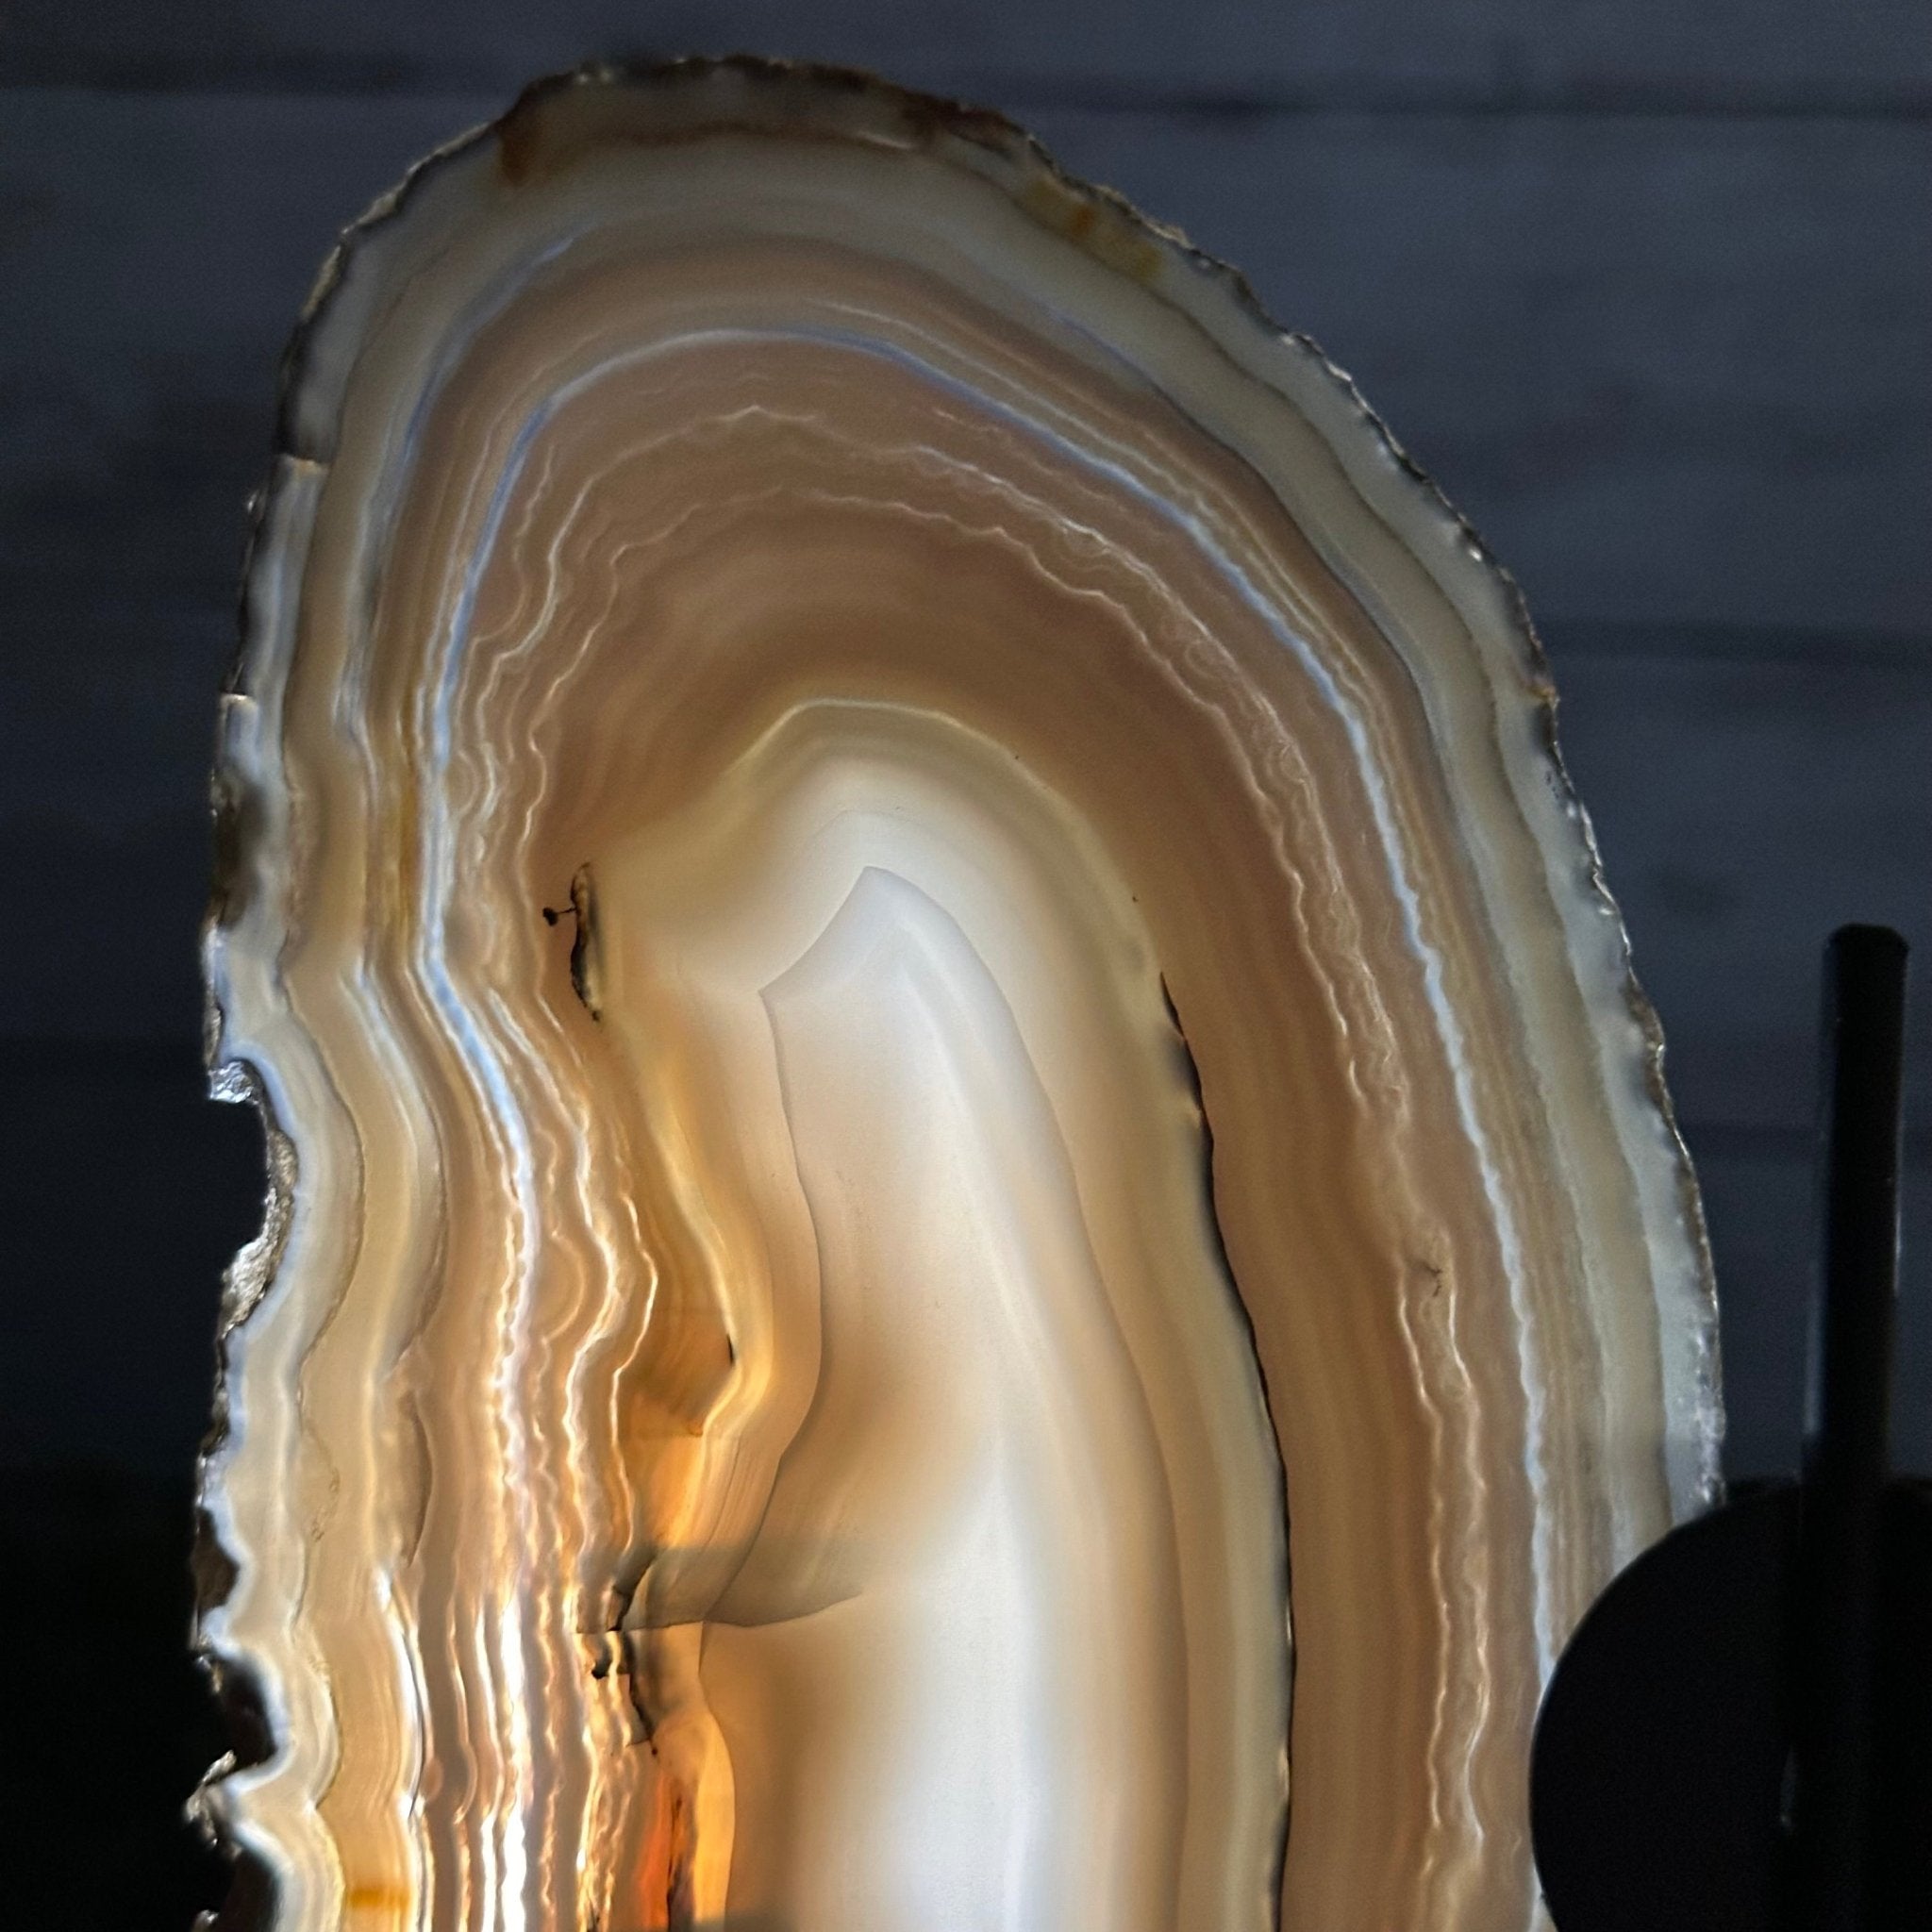 Natural Brazilian Agate "Butterfly Wings", 9.2" Tall #5050NA-106 - Brazil GemsBrazil GemsNatural Brazilian Agate "Butterfly Wings", 9.2" Tall #5050NA-106Agate Butterfly Wings5050NA-106